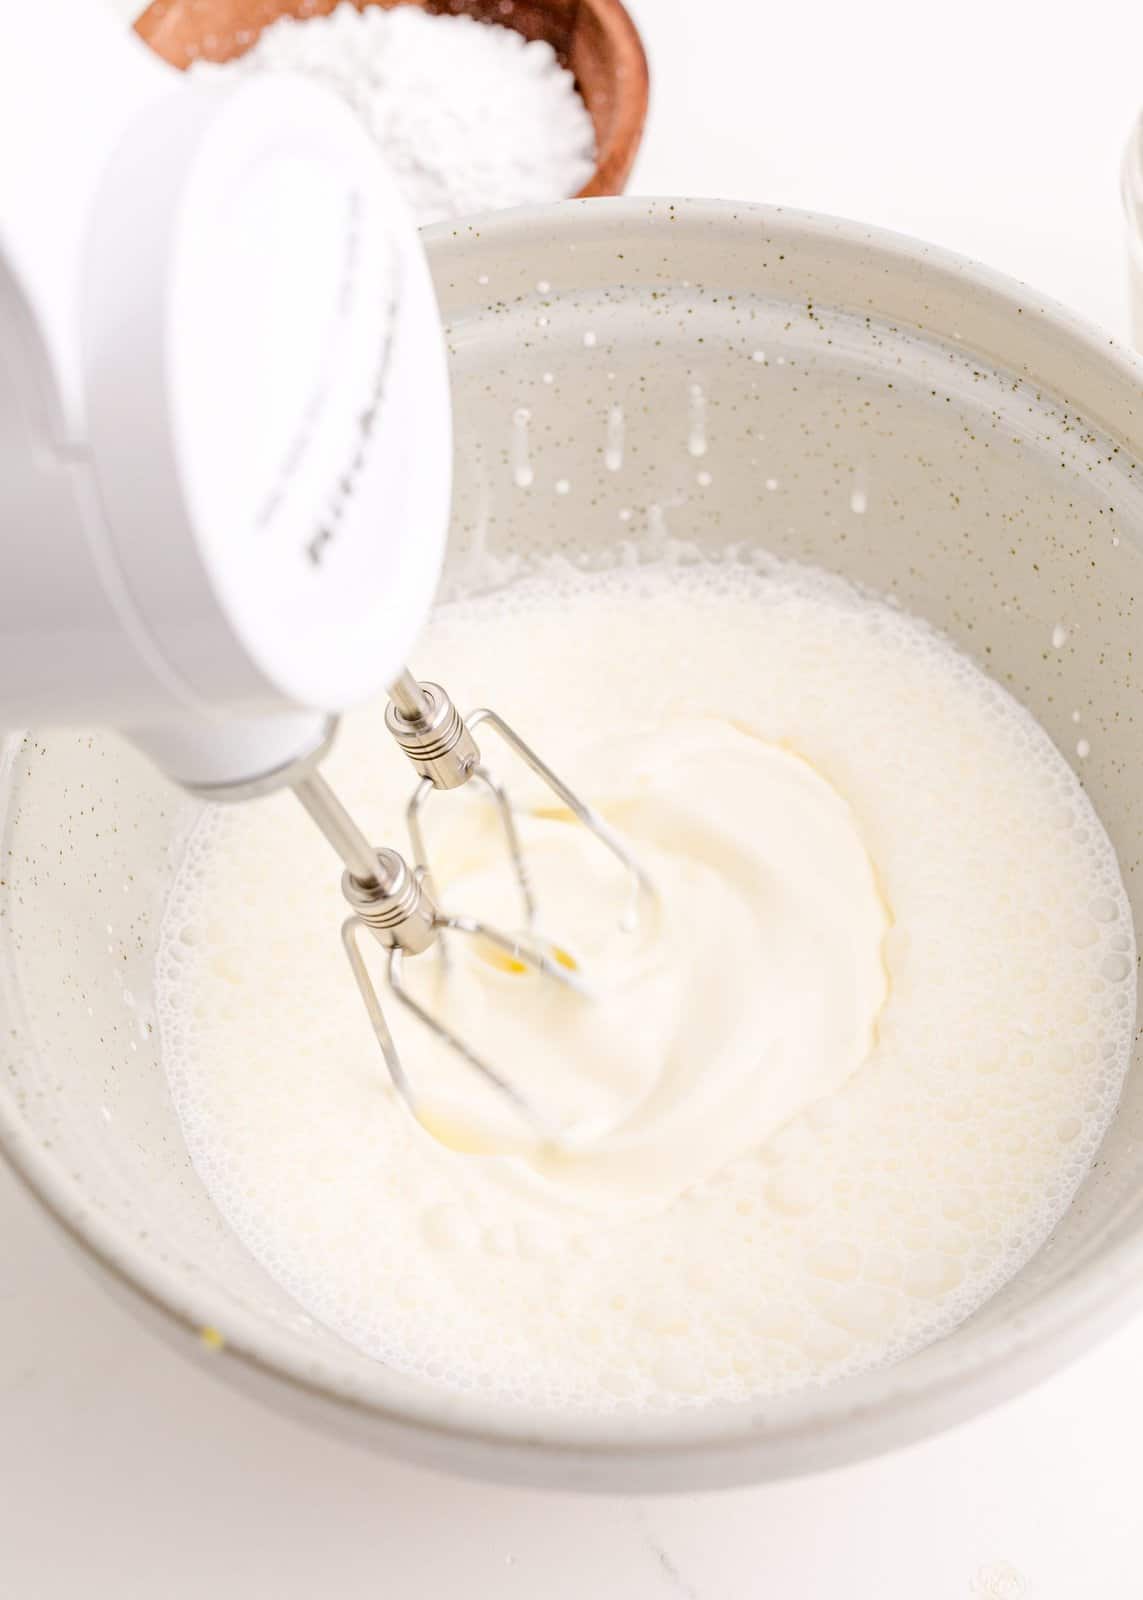 Hand mixer beating the heavy whipping cream in bowl.